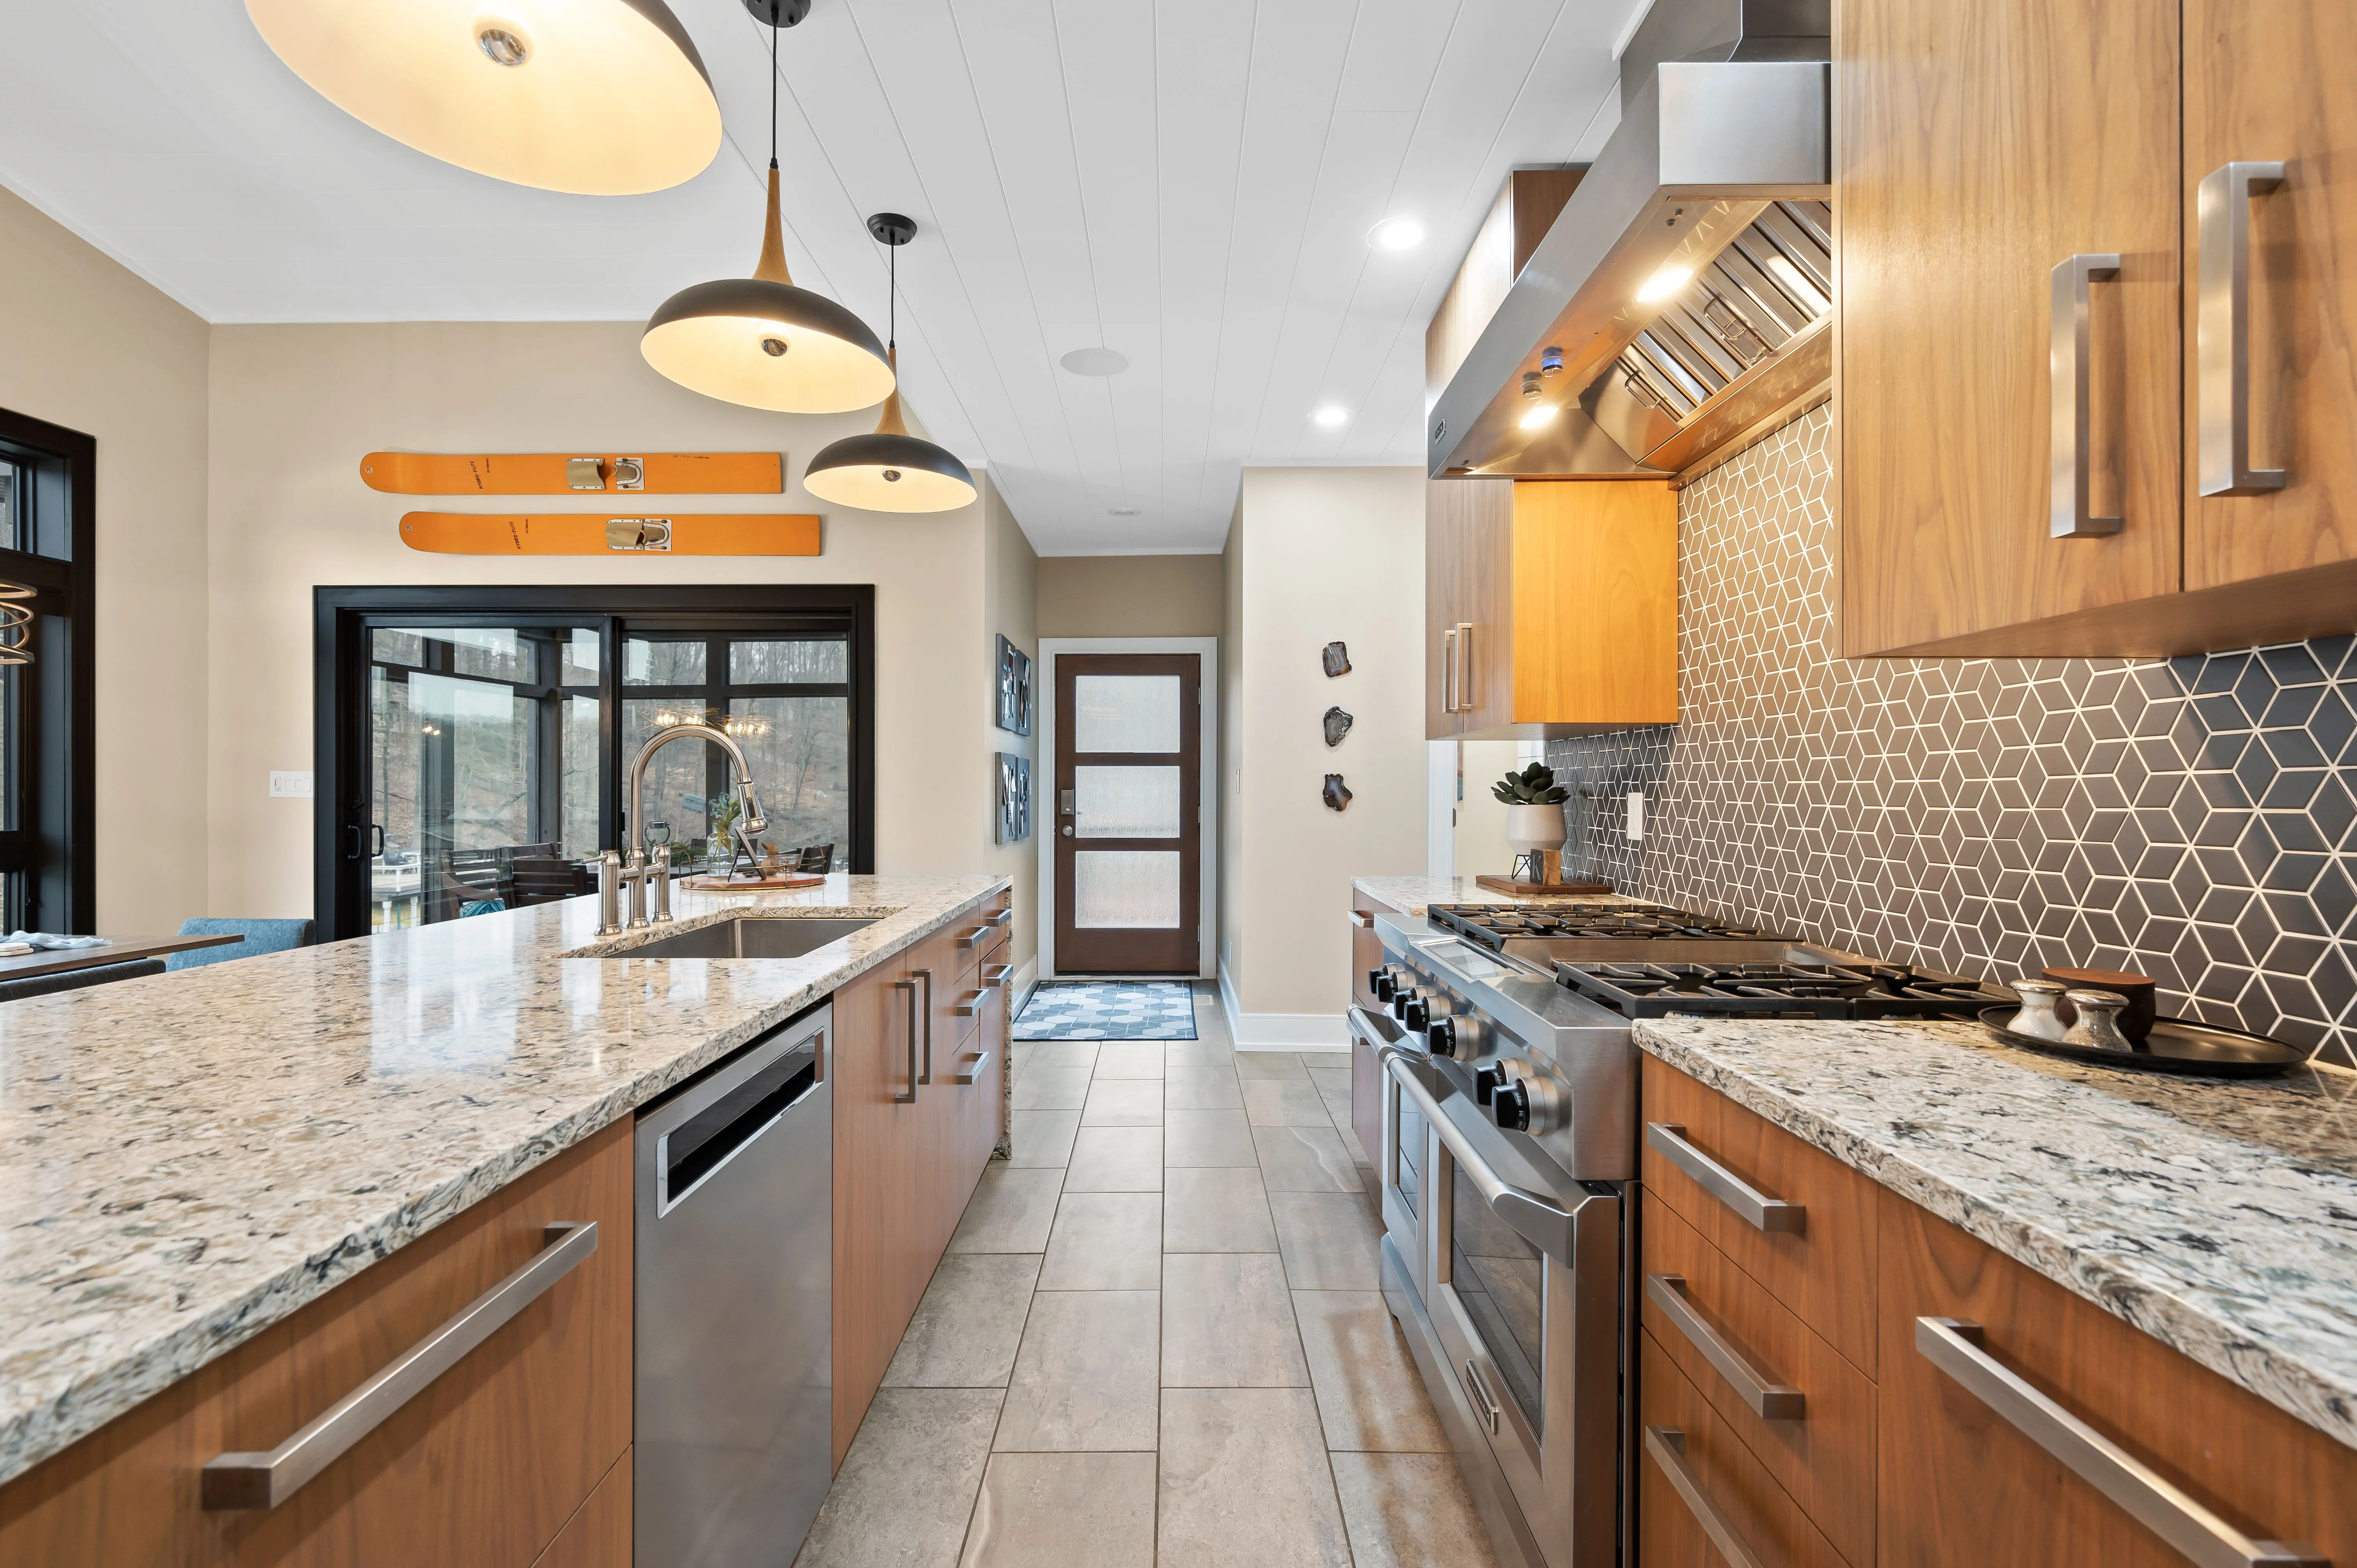 Modern kitchen interior with granite countertops, wooden cabinetry, and stainless steel appliances.